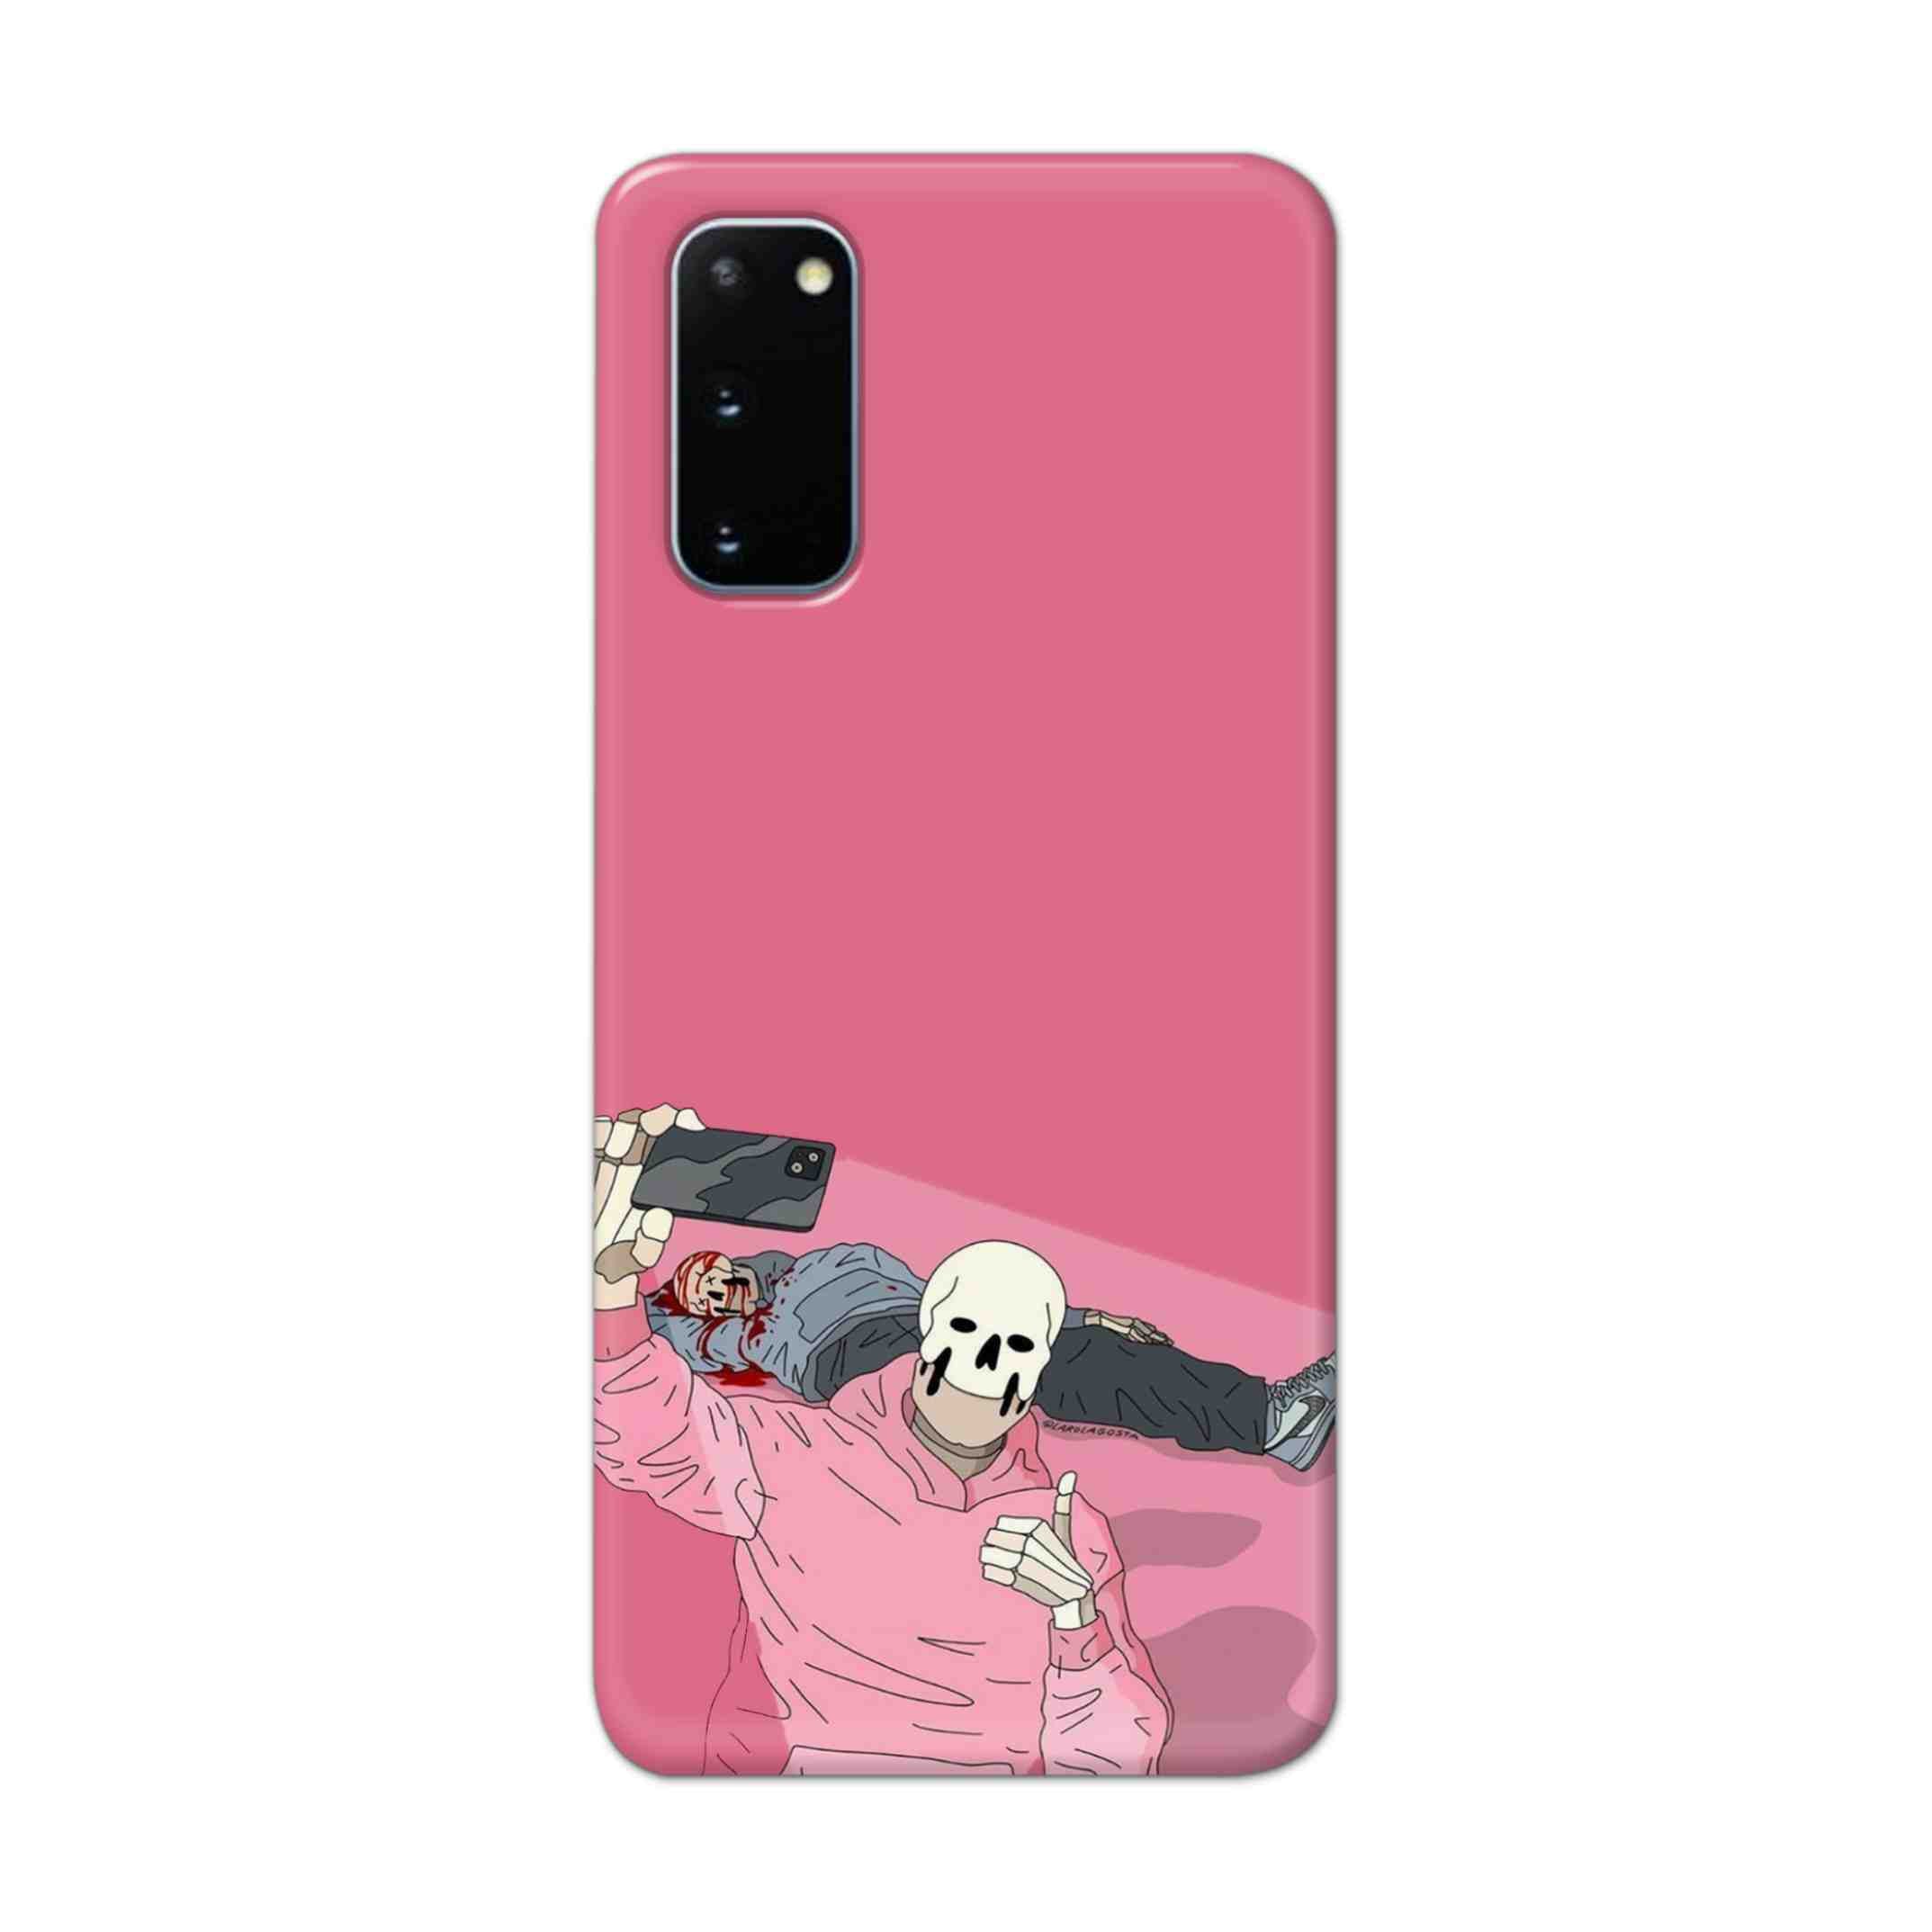 Buy Selfie Hard Back Mobile Phone Case Cover For Samsung Galaxy S20 Online